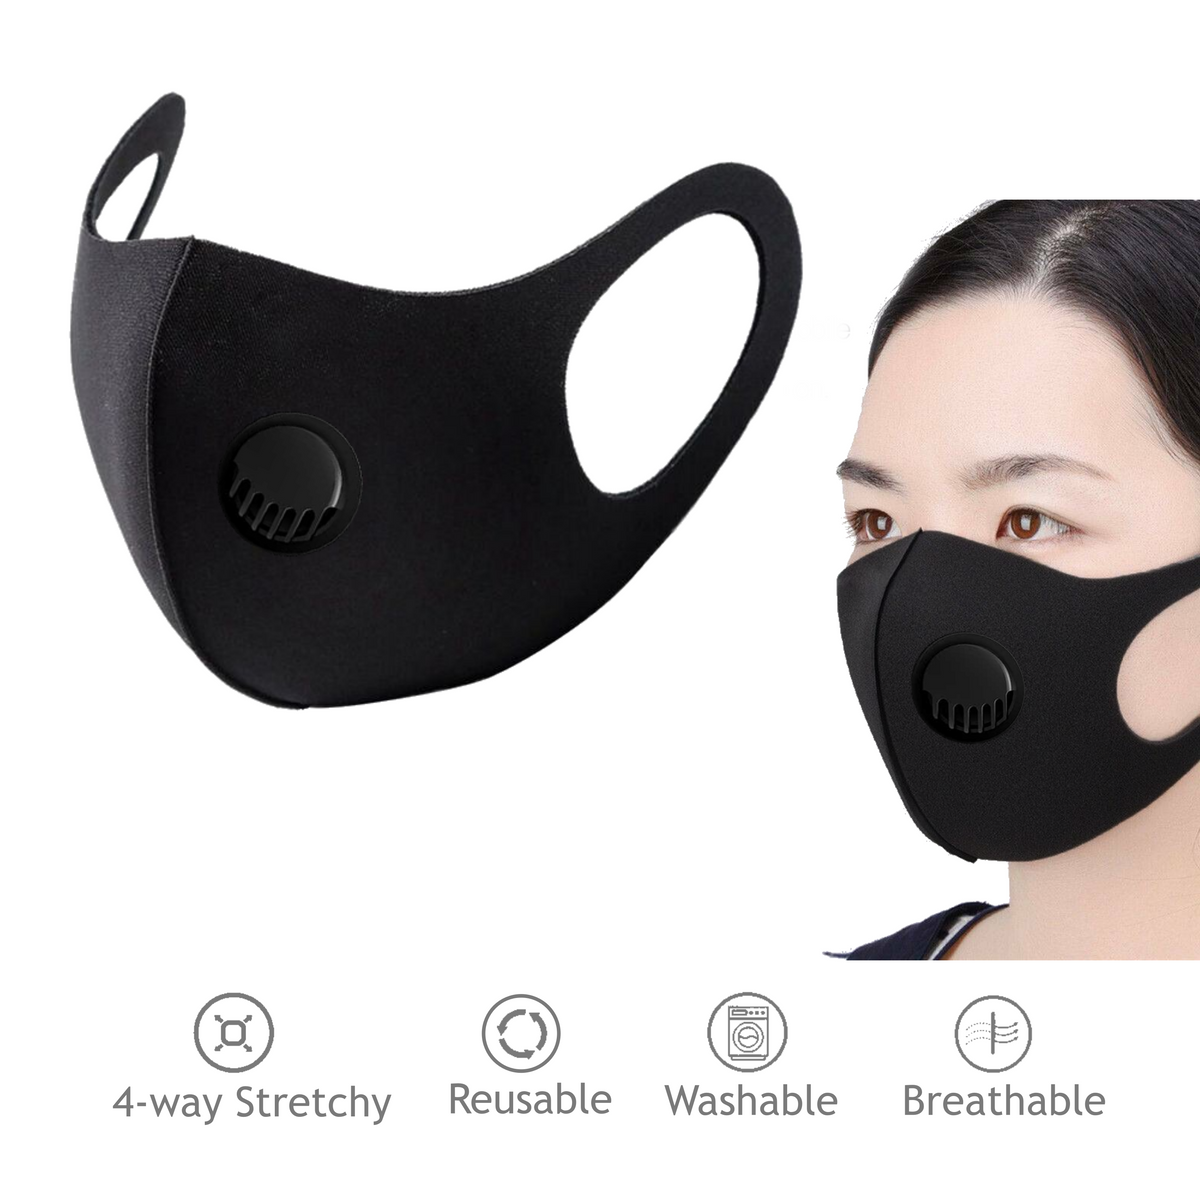 Reusable Face Mask Black Pattern with Valve Breathing Filter - TDI, Inc